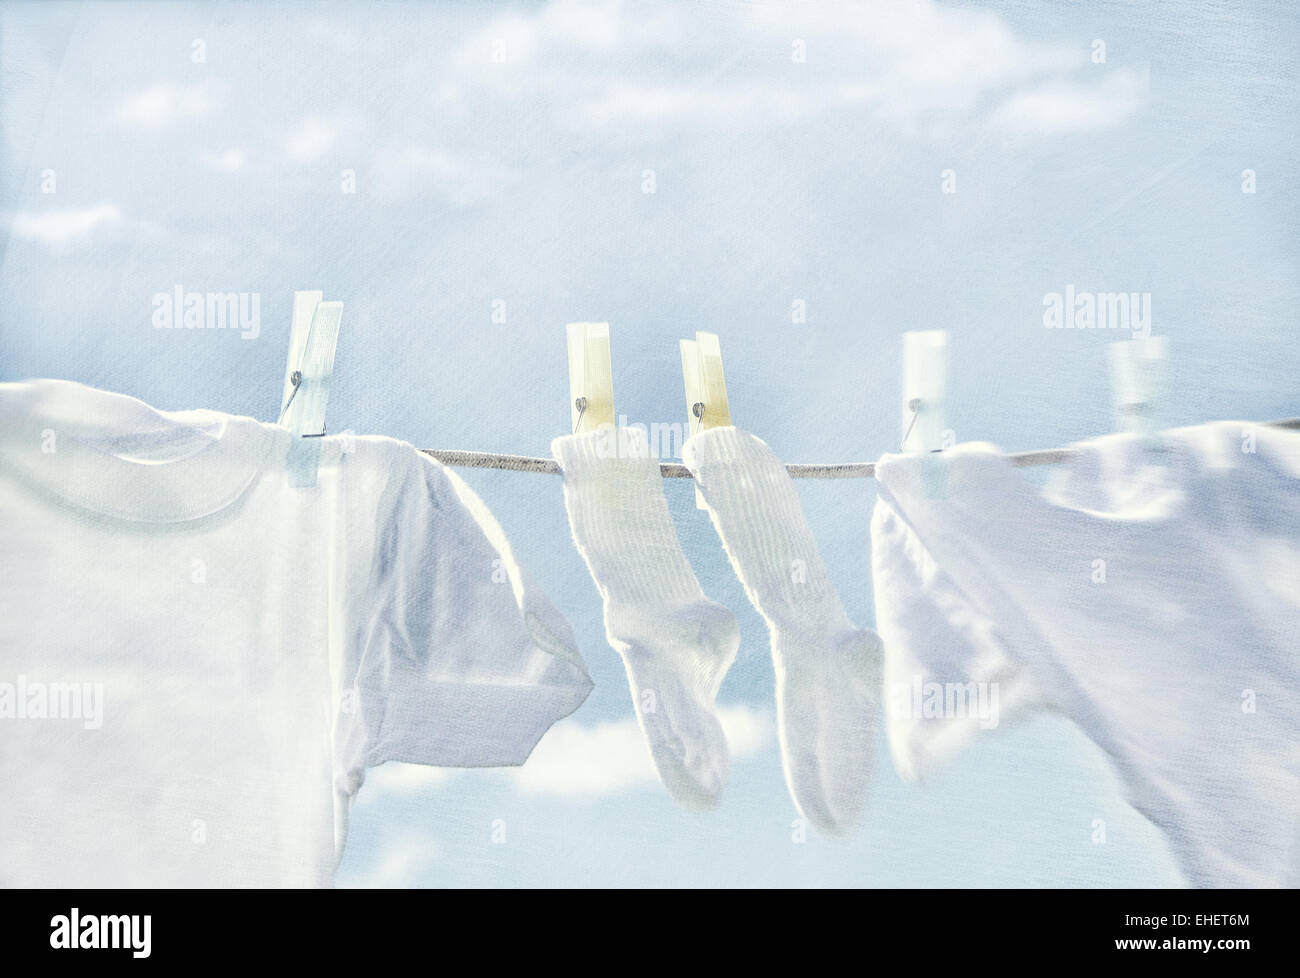 Clothes hanging on clothesline Stock Photo - Alamy